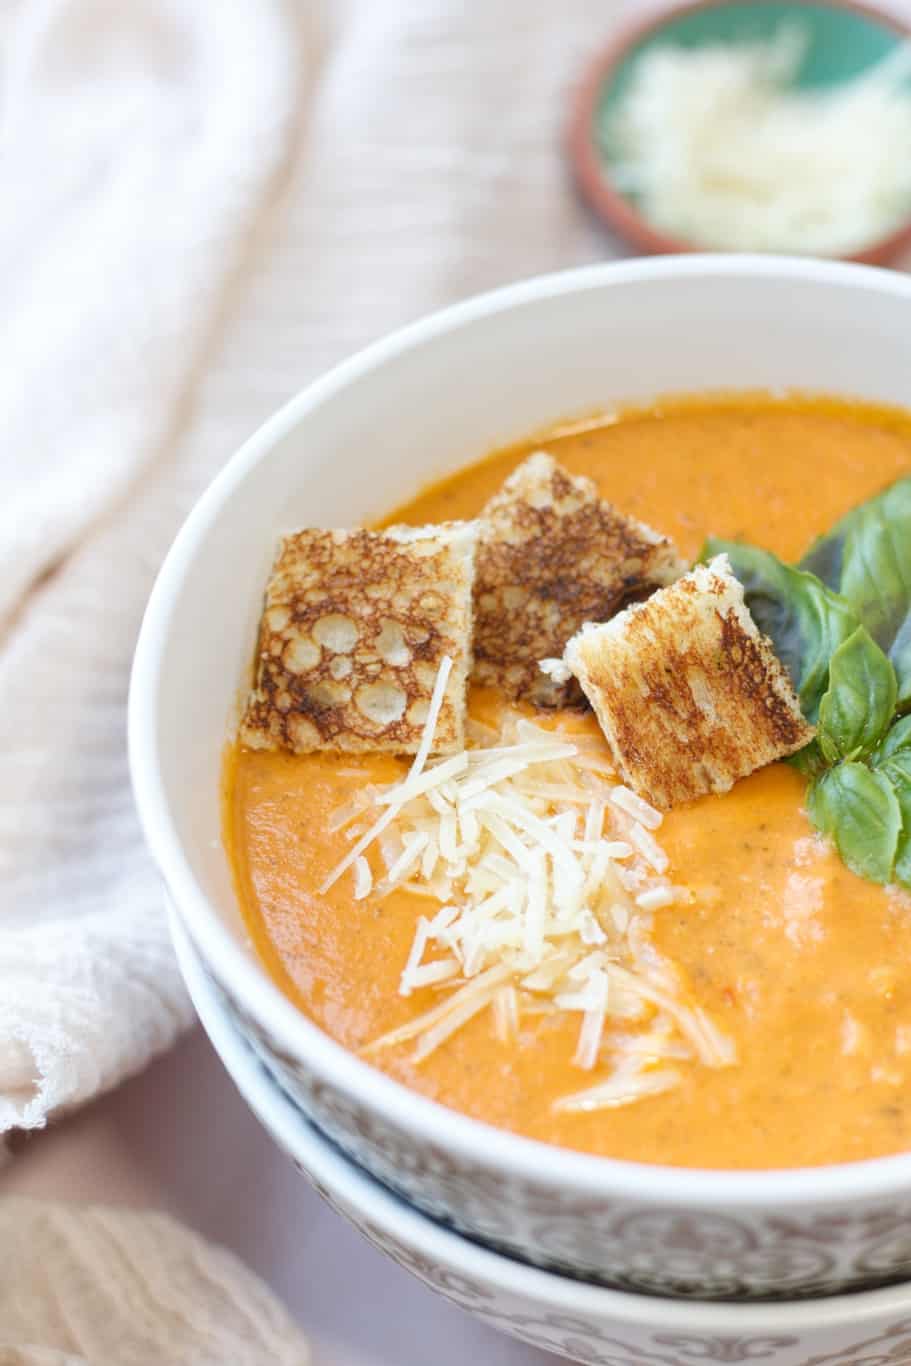 This soup with heavy cream is served with fresh basil leaves, grated parmesan cheese, and crunch croutons on the top.